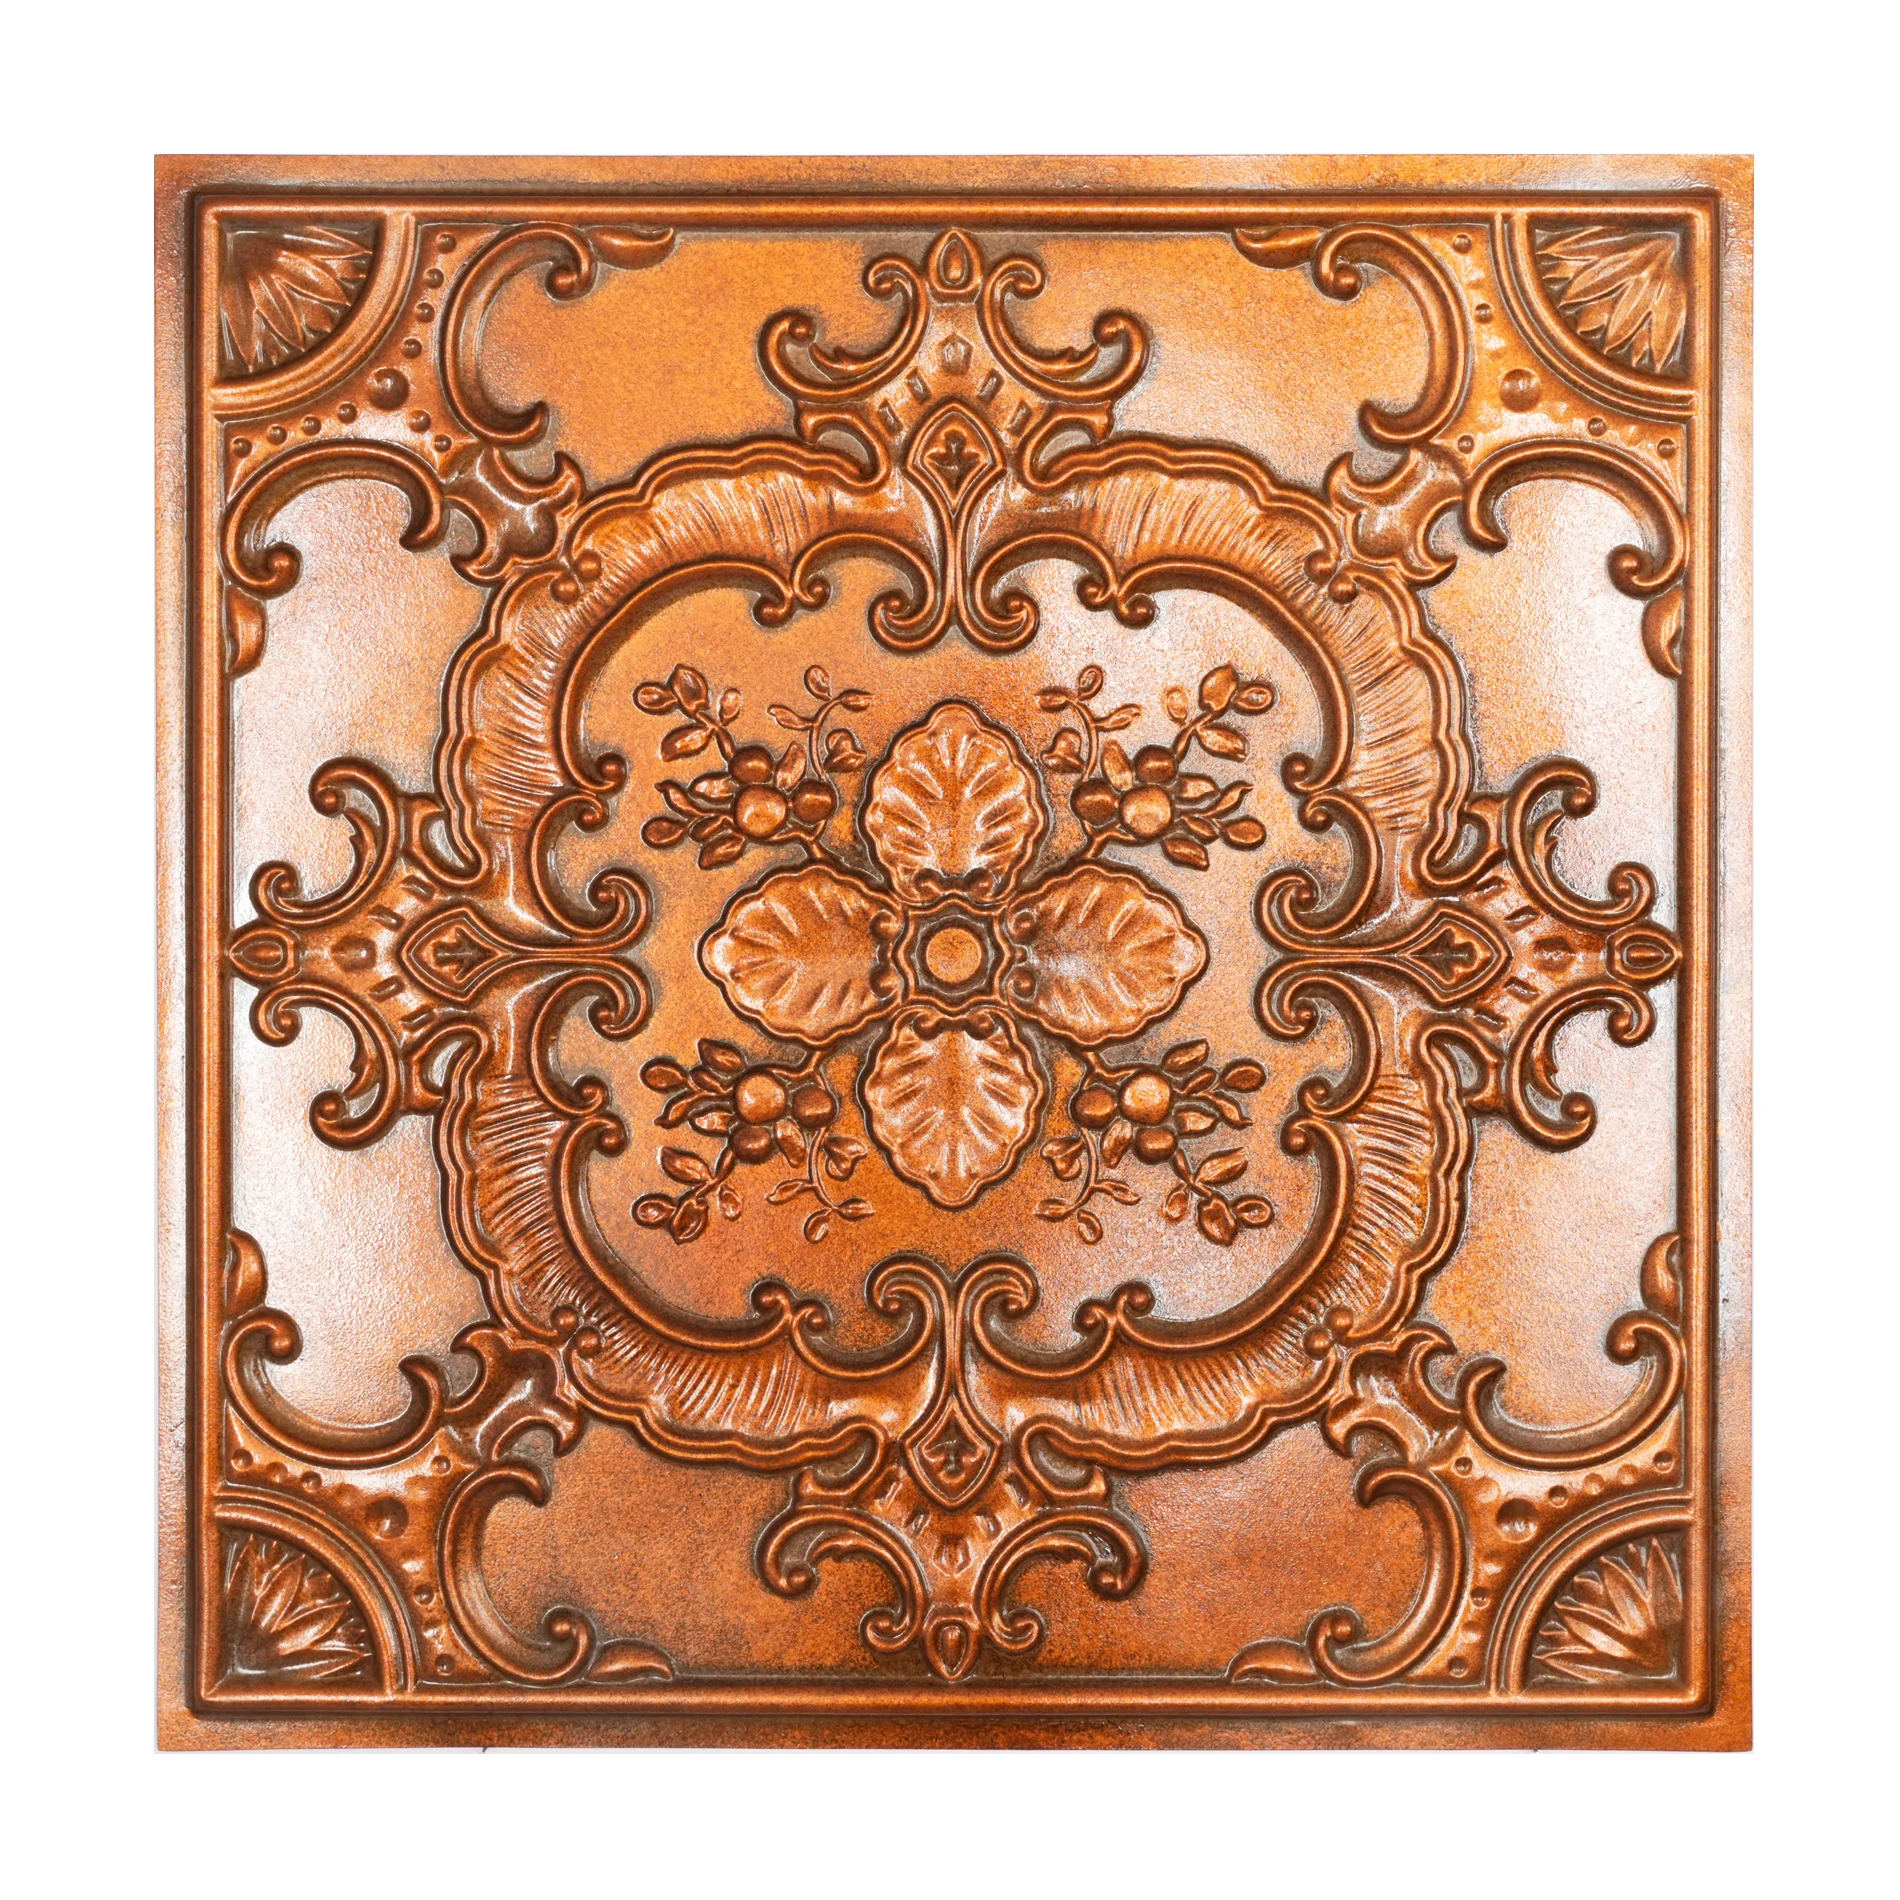 Art style 3D embossing wall panels celling decorations faux tin ceiling tiles PL19 archaic copper